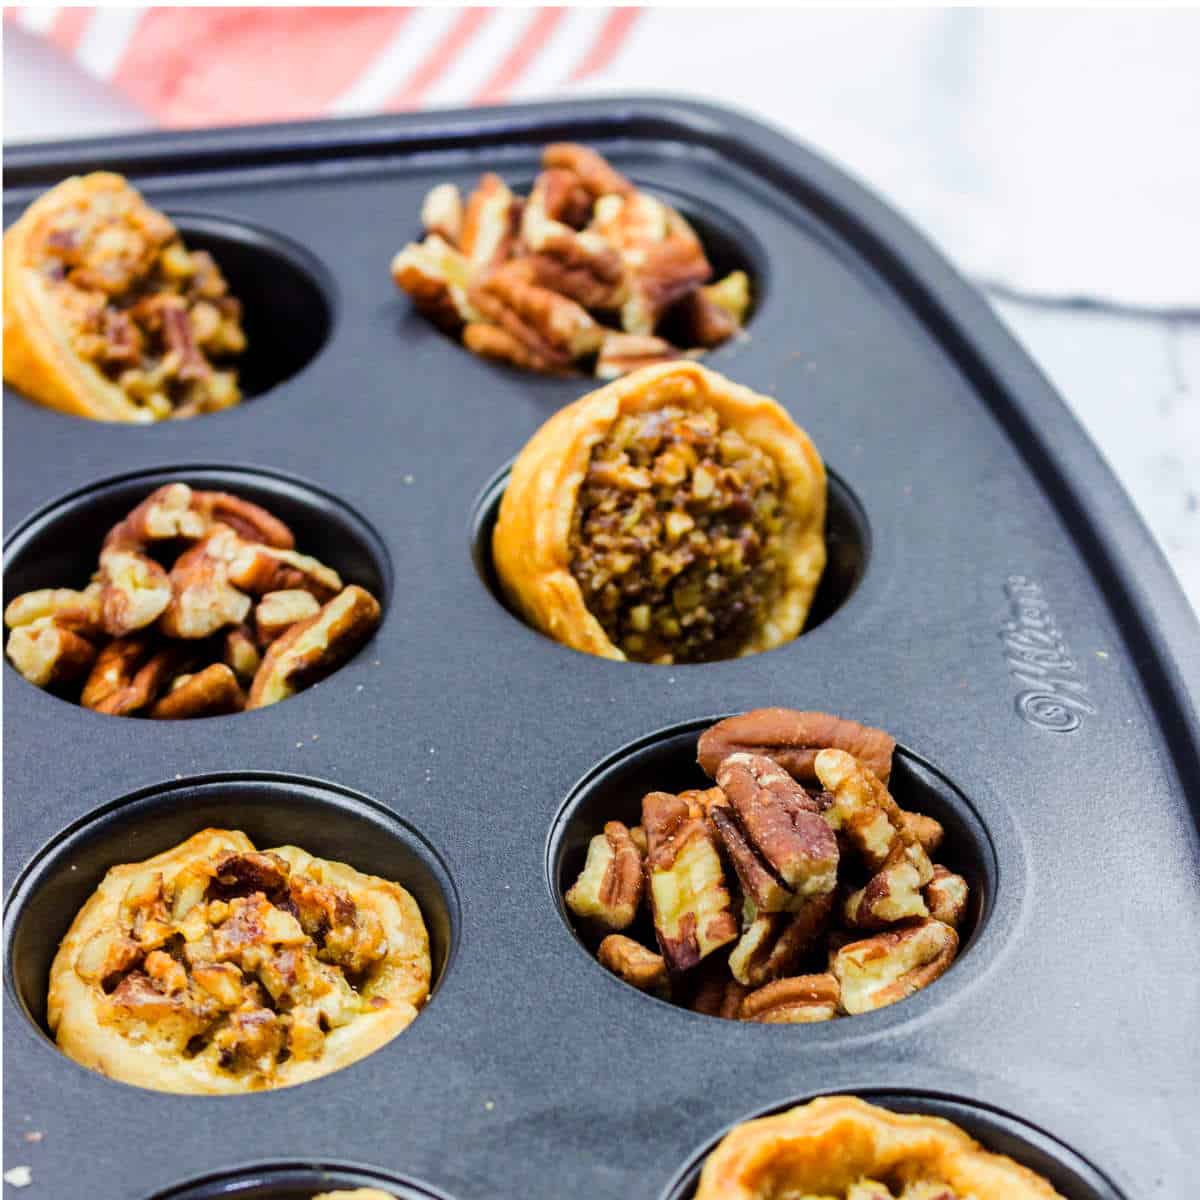 baked pampered chef pecan tassies in a mini muffin pan.